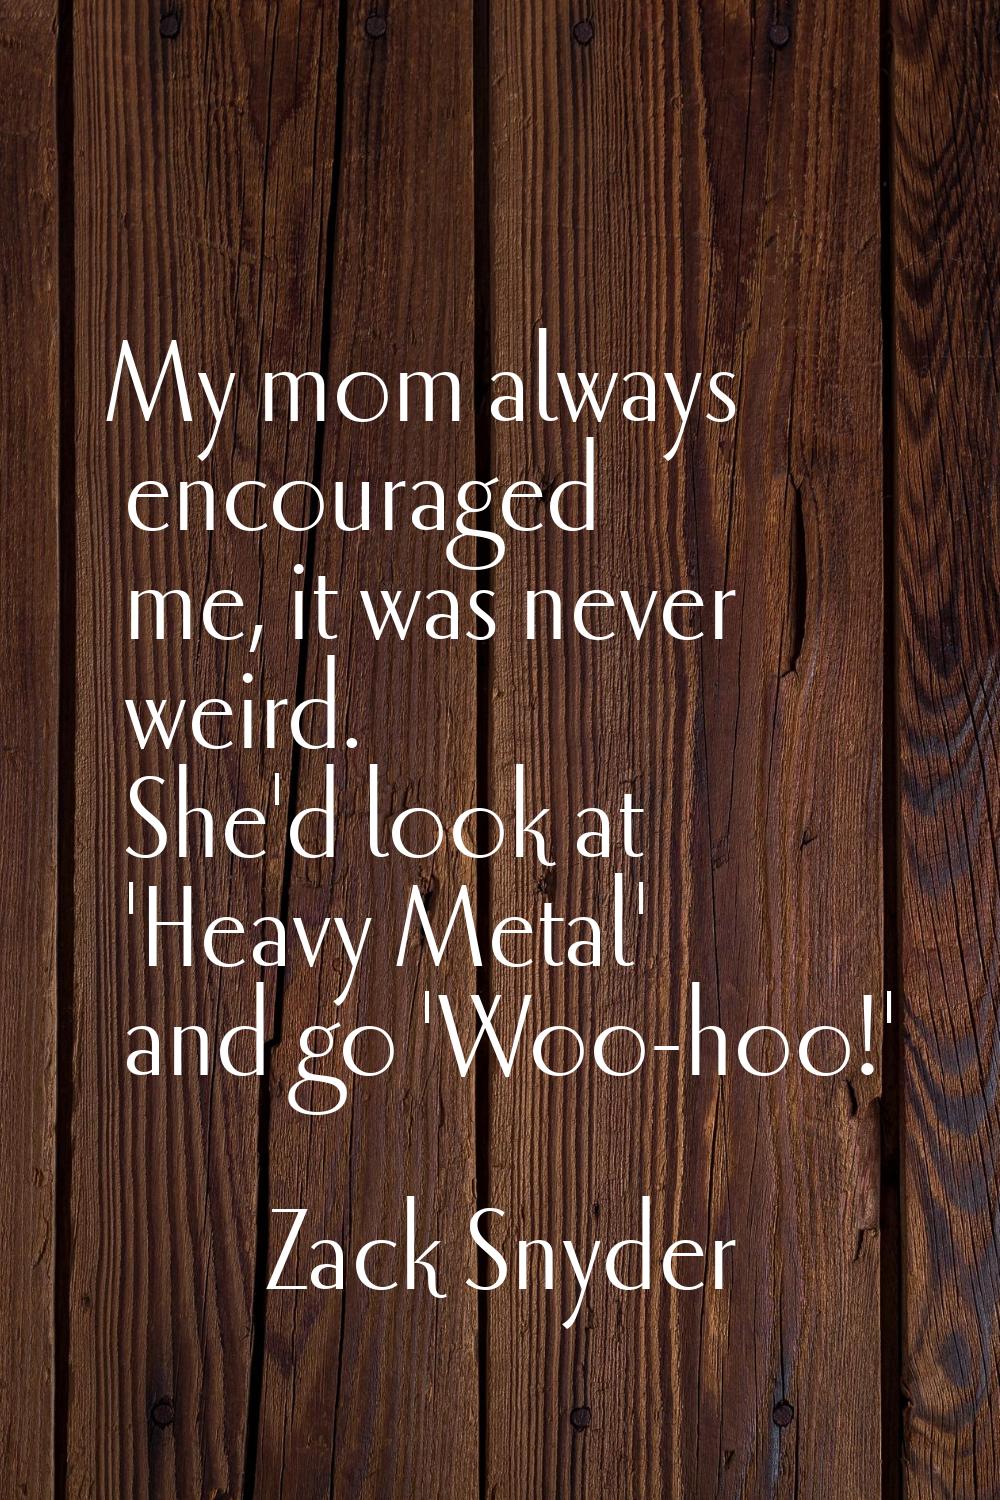 My mom always encouraged me, it was never weird. She'd look at 'Heavy Metal' and go 'Woo-hoo!'